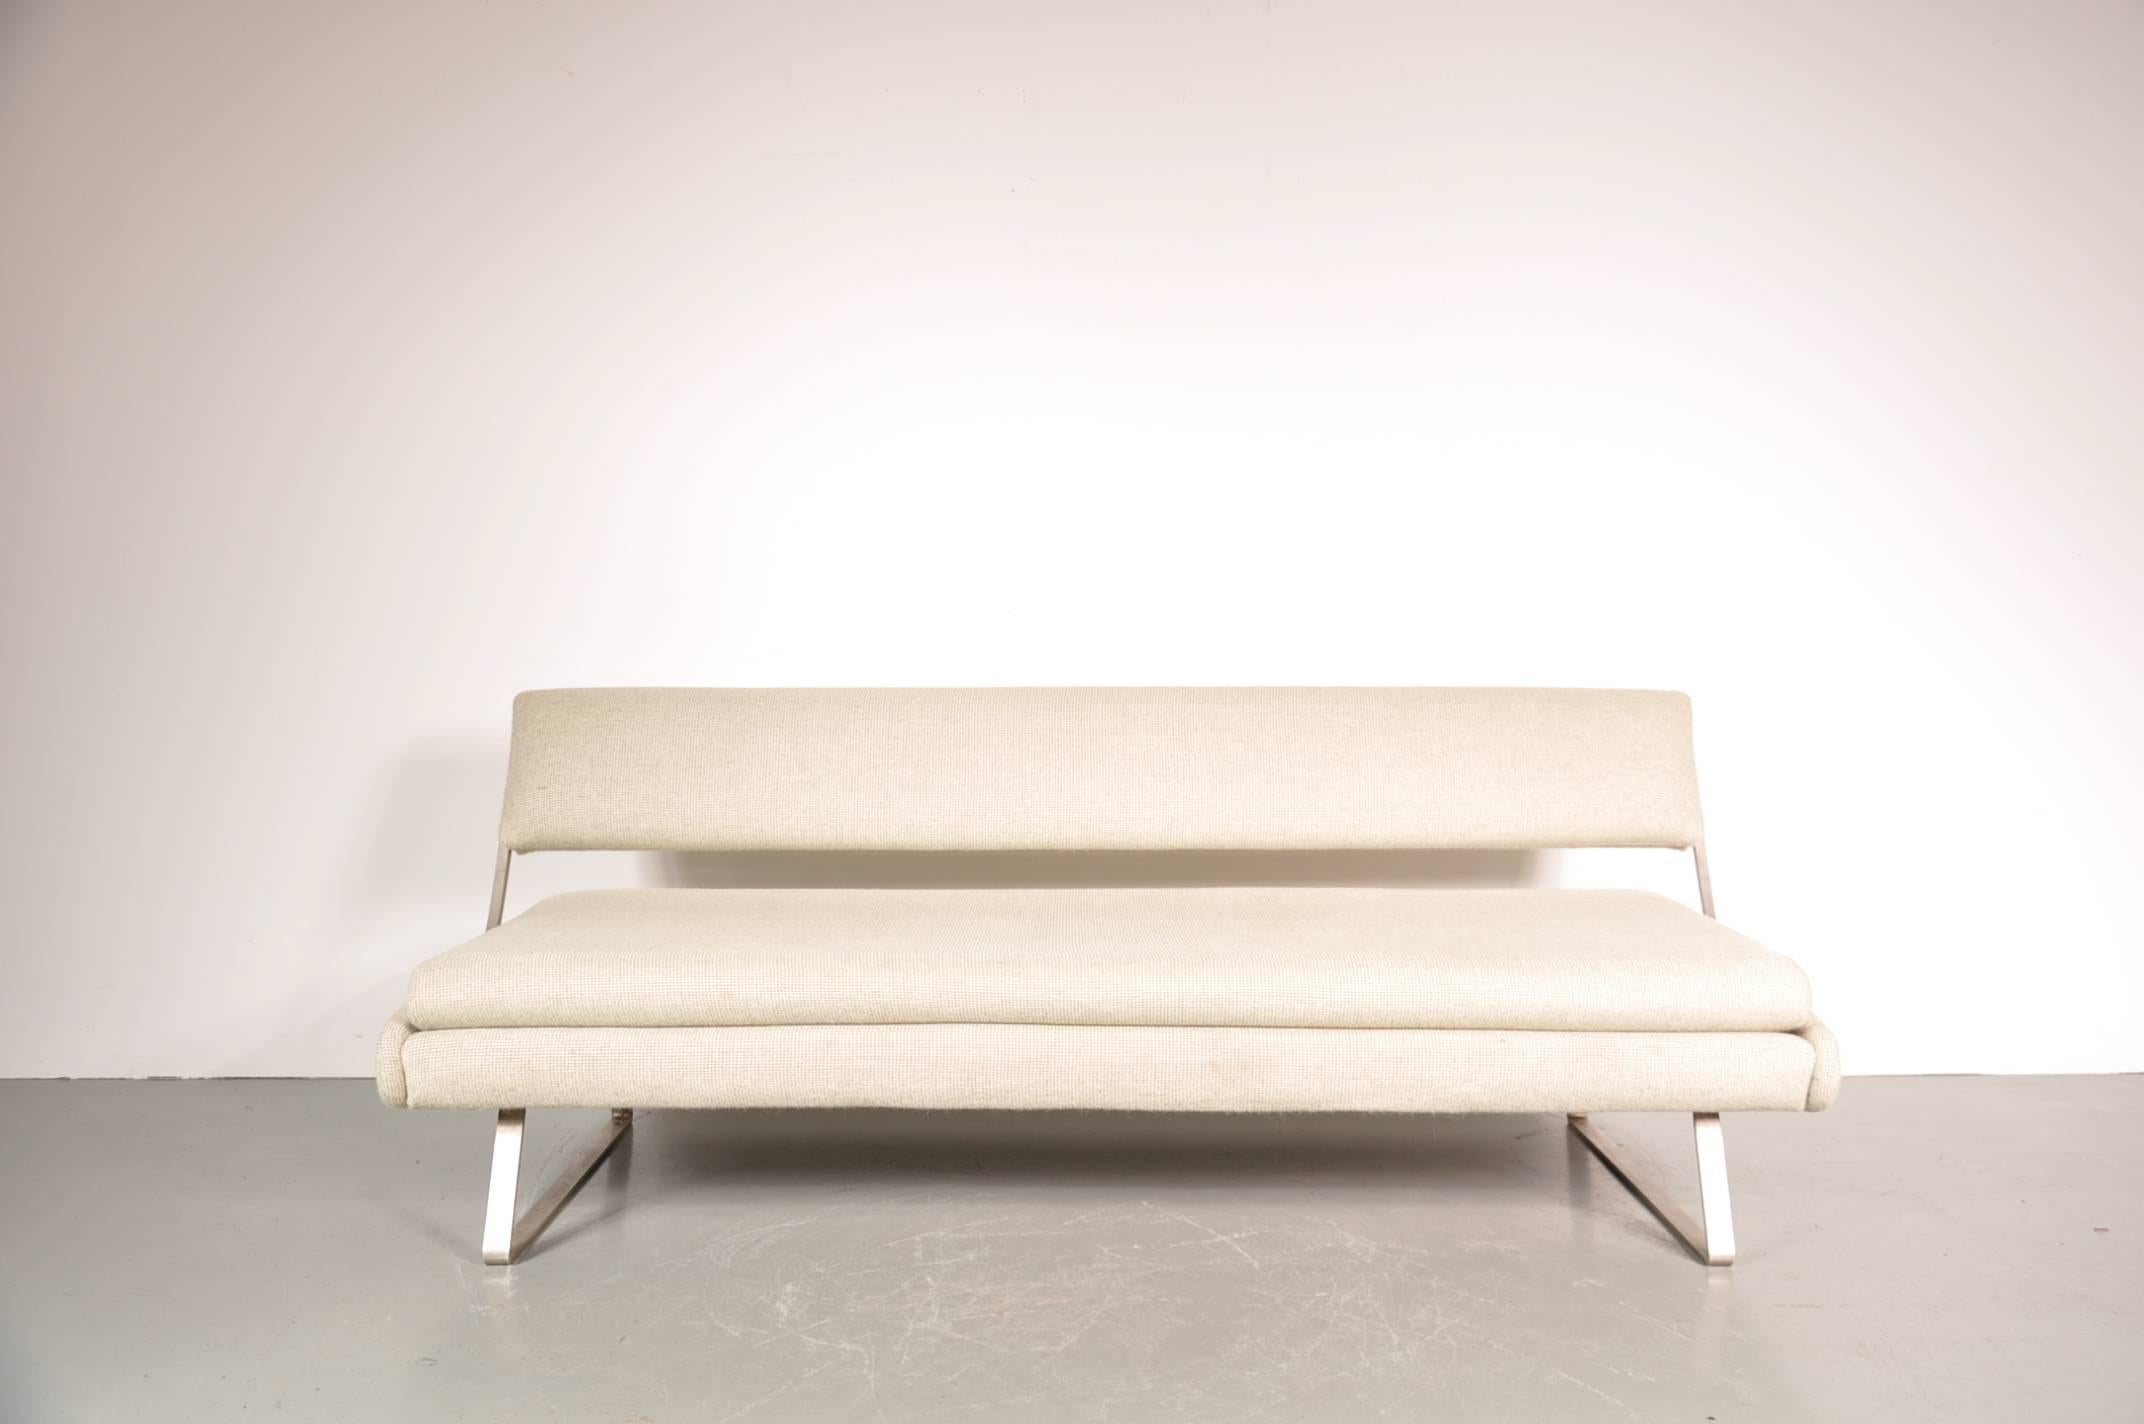 Unique three-seater sofa / sleeping bench, manufactured in Italy around 1960.

This beautiful piece has a unique mechanism to convert the sofa into a sleeping bench. The backrest can be lowered to create a bed. It has a high quality chrome metal